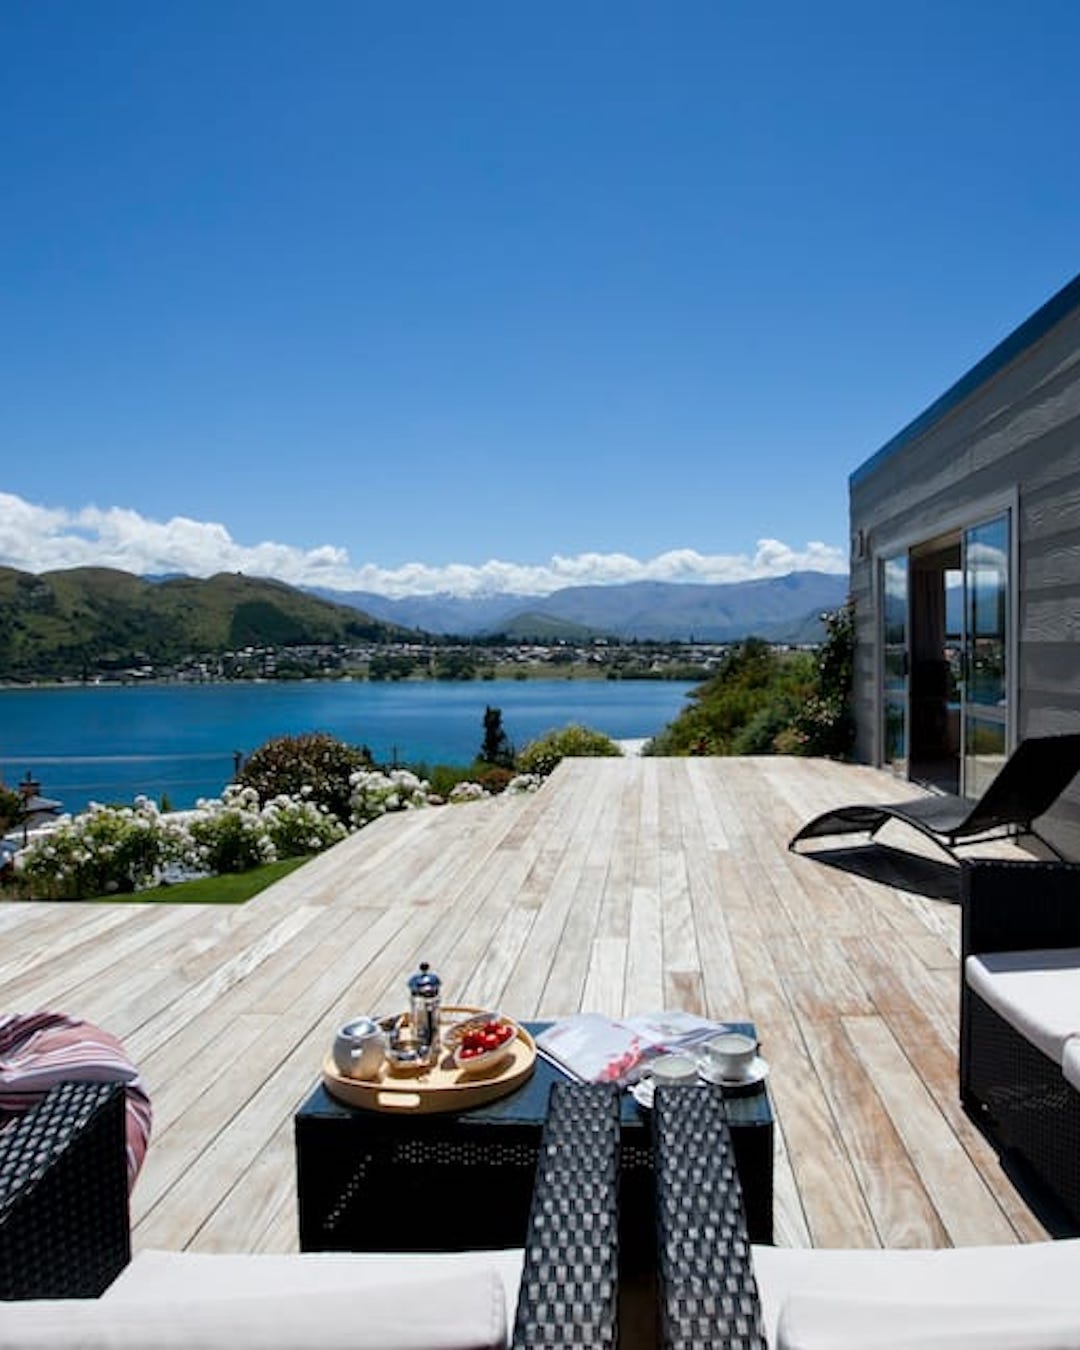 A large verandah overlooking the lake and mountains in Queenstown